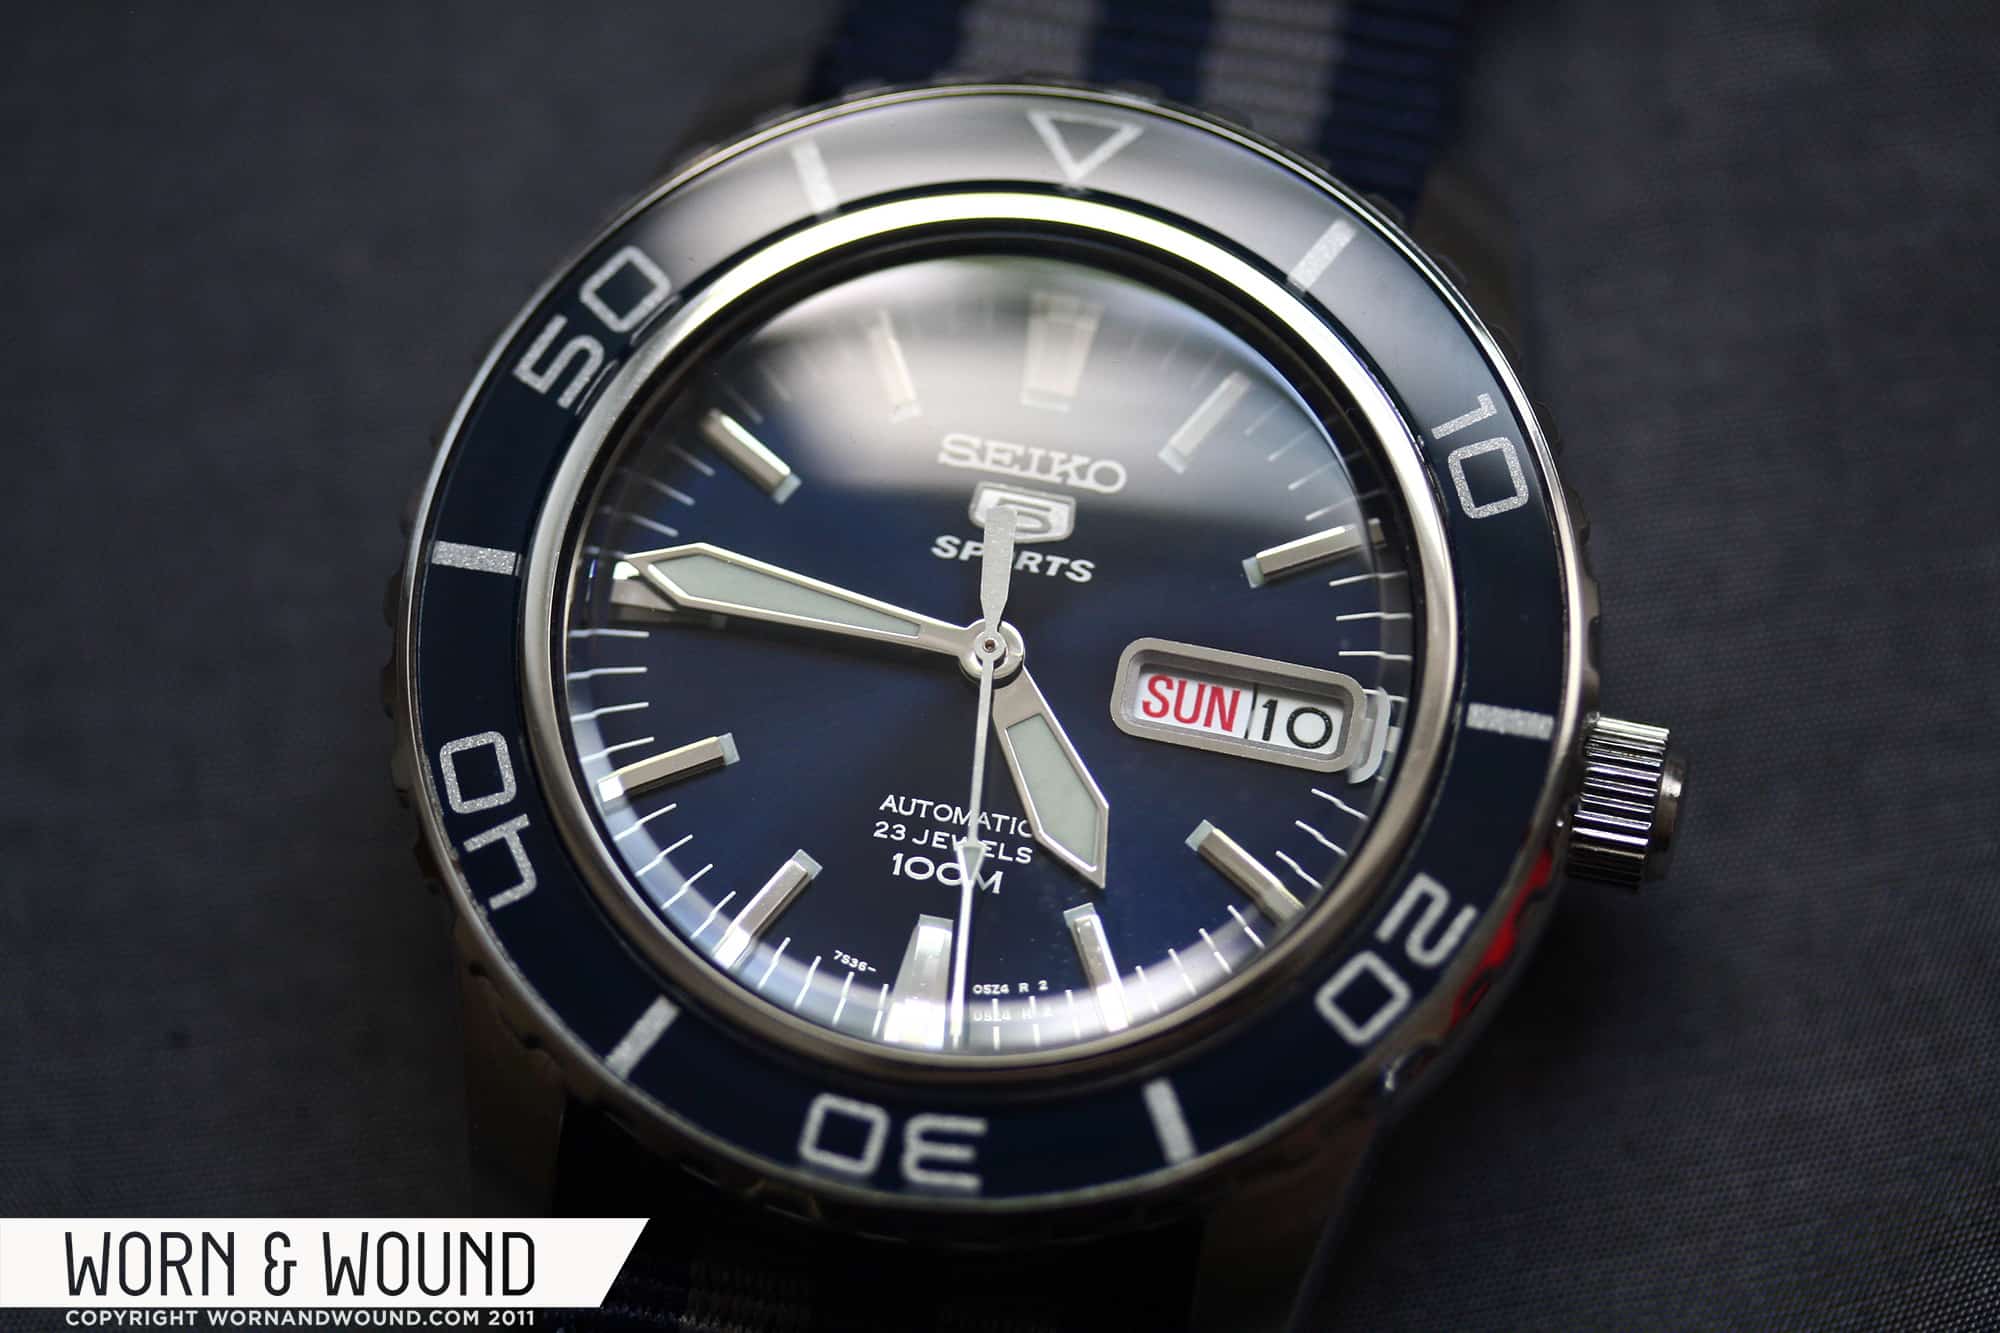 Review: Seiko 5 SNZH53 Diver in Blue - Worn & Wound